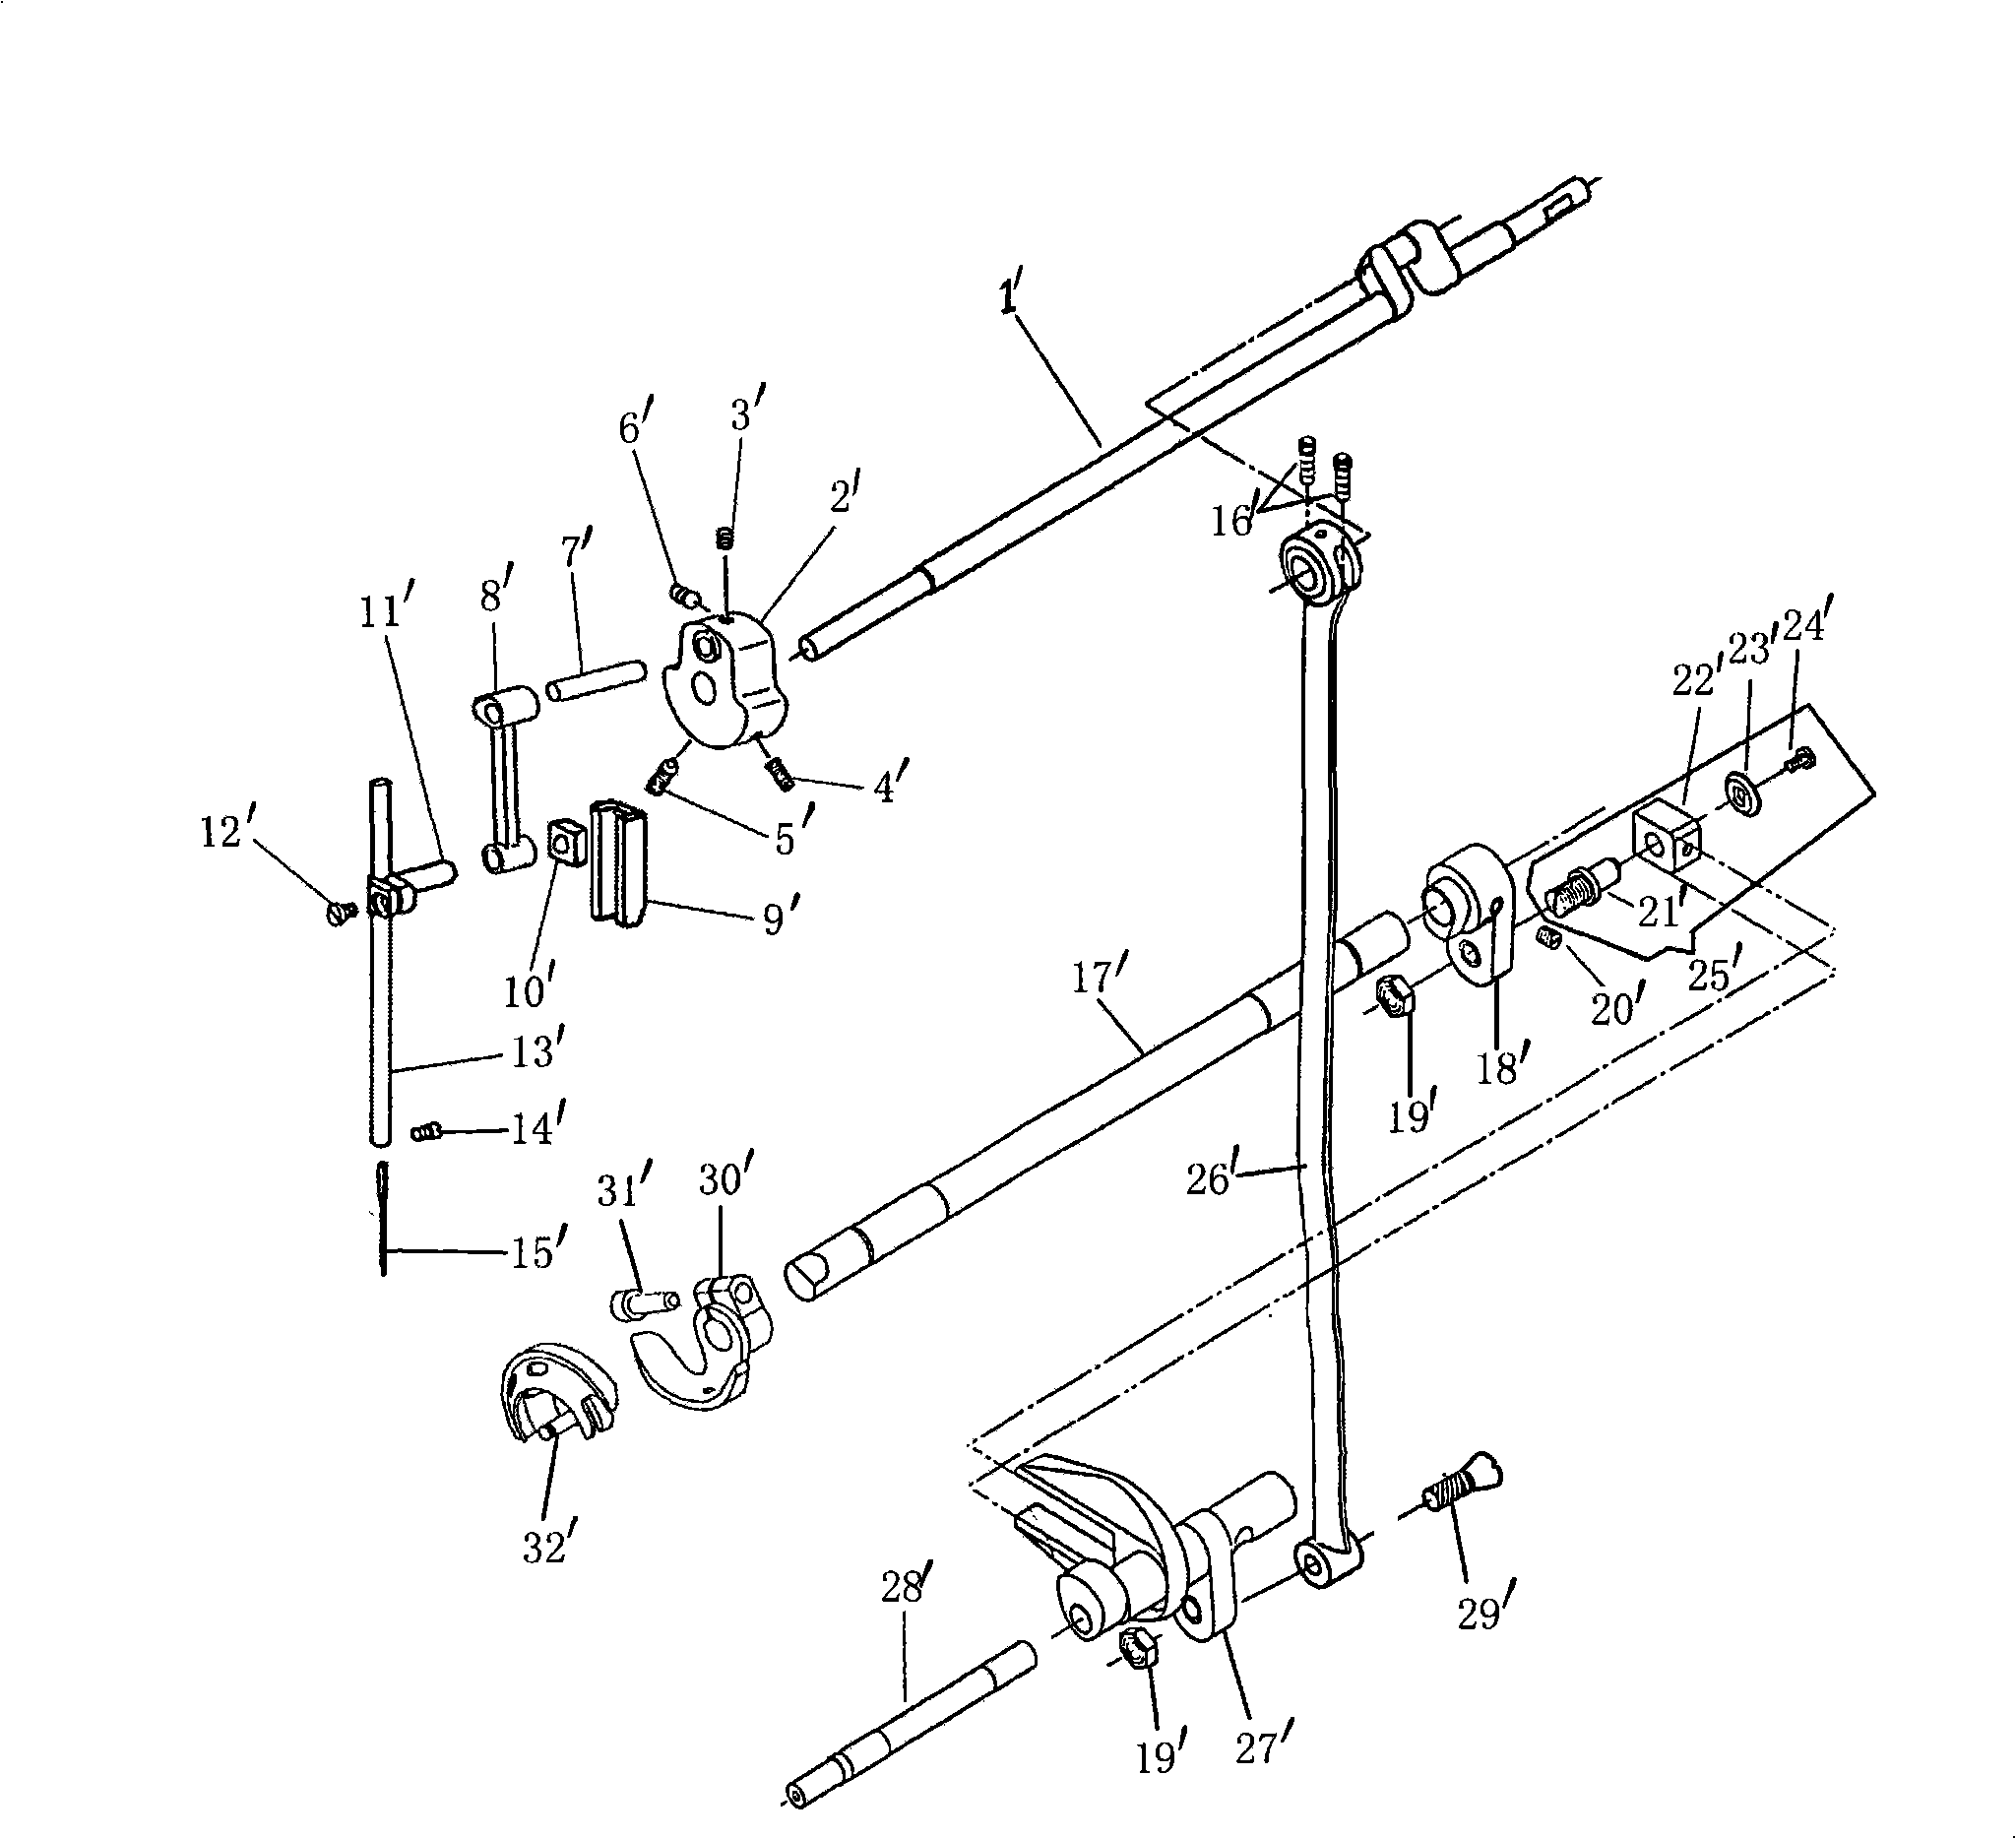 Needle bar and thread hooking assembly of sewing machine